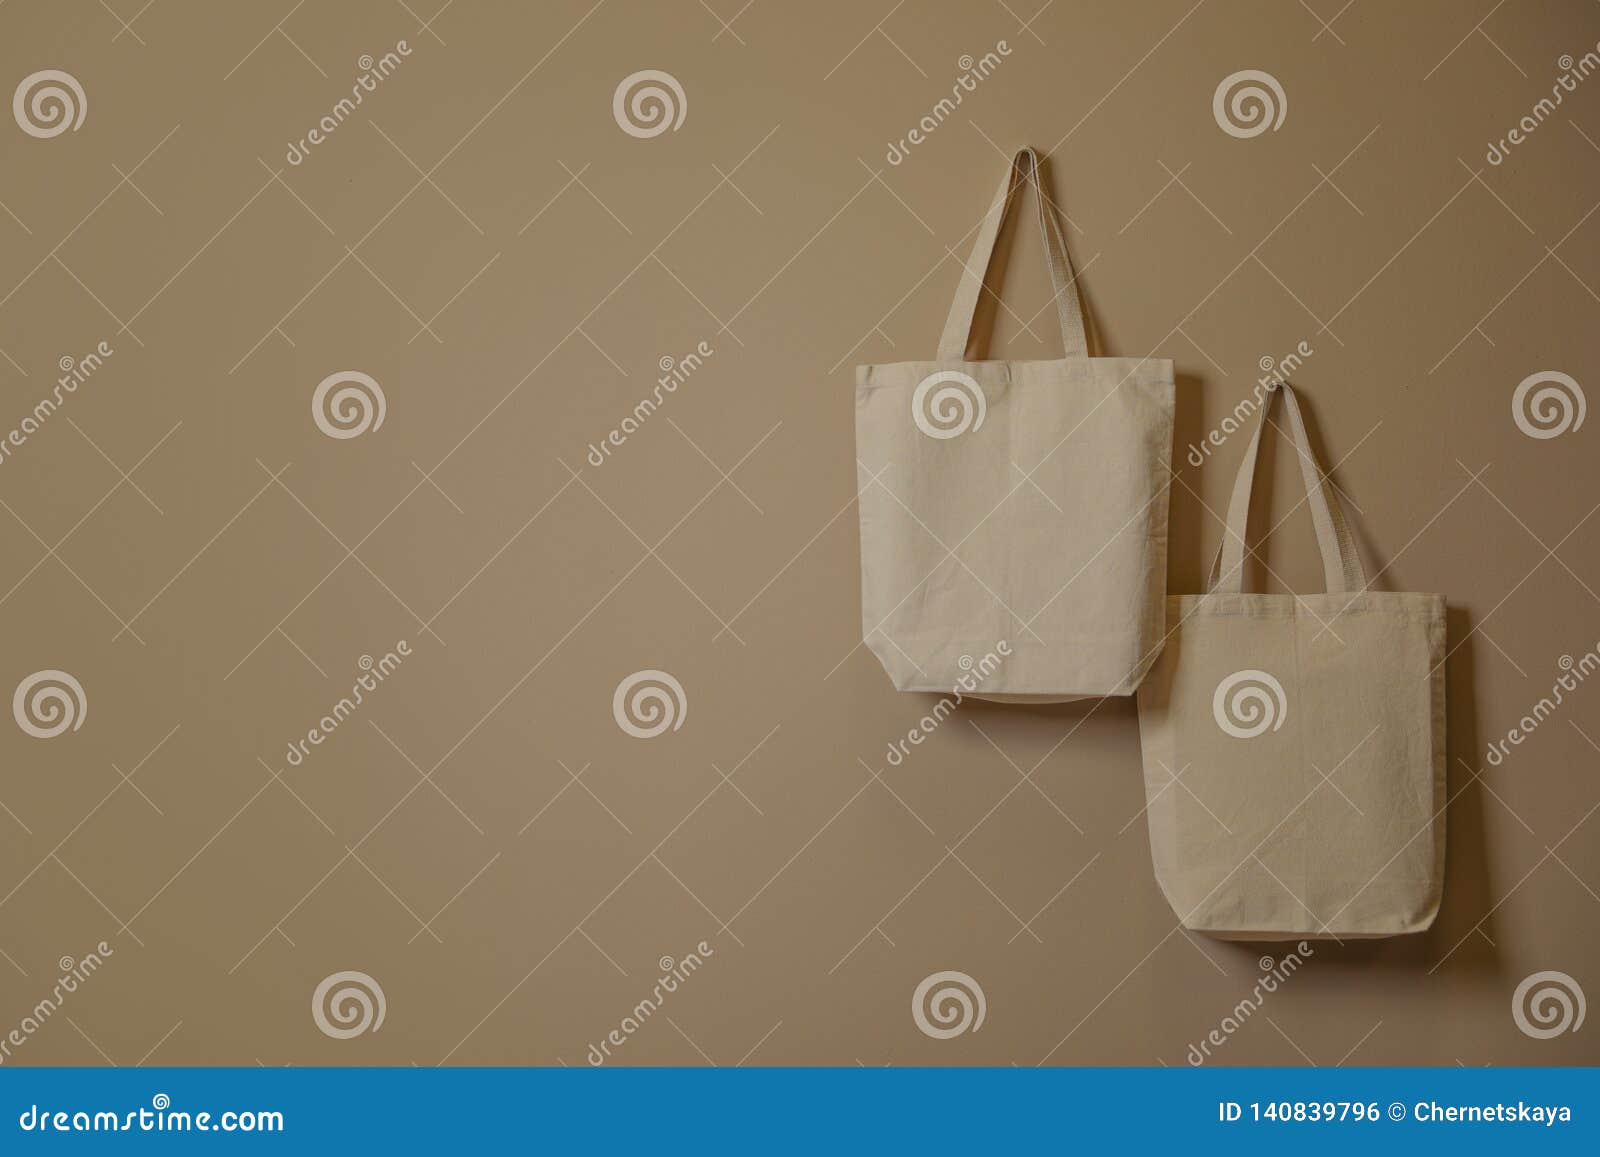 Download Eco Tote Bags Hanging On Color Wall. Stock Photo - Image ...